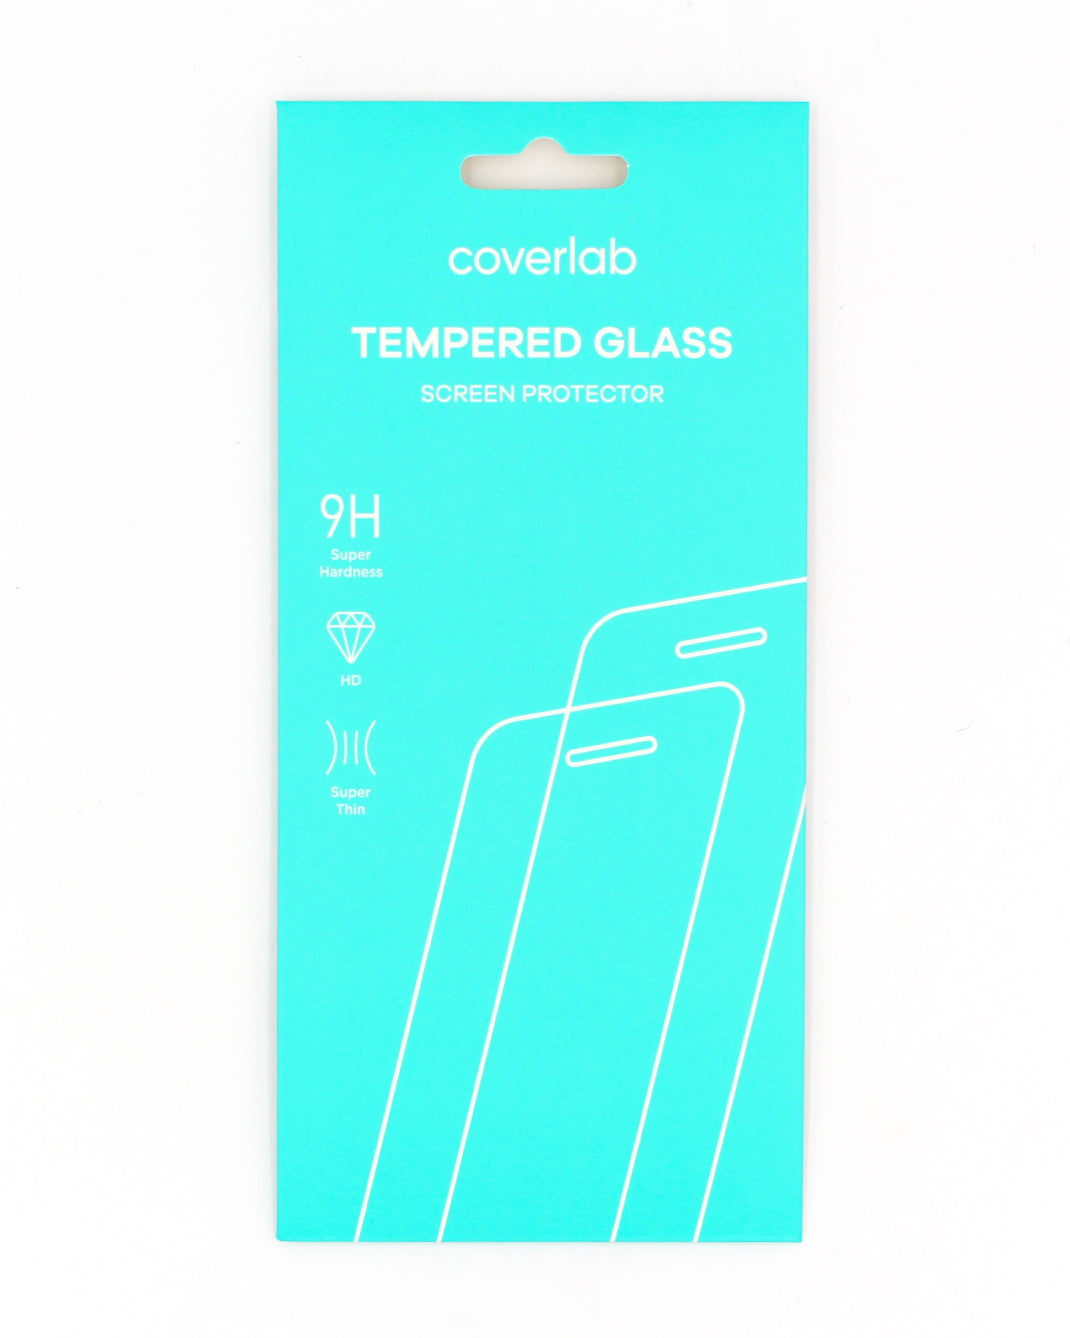 Tempered Glass - Coverlab